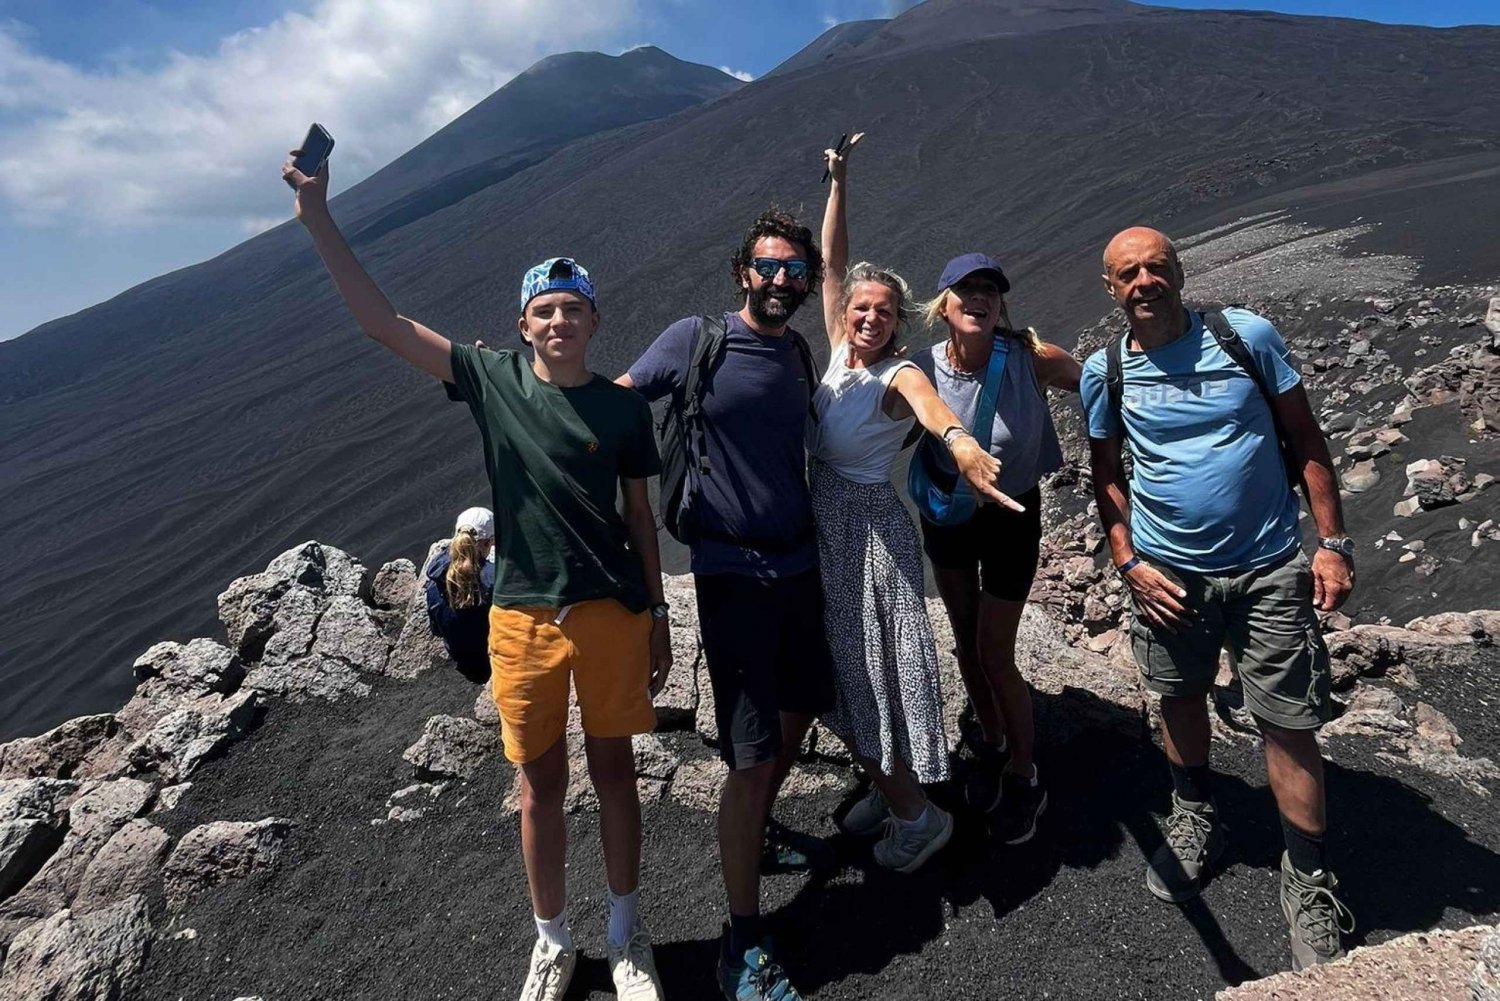 Etna day trip from Syracuse. Trek, wine and lunch included